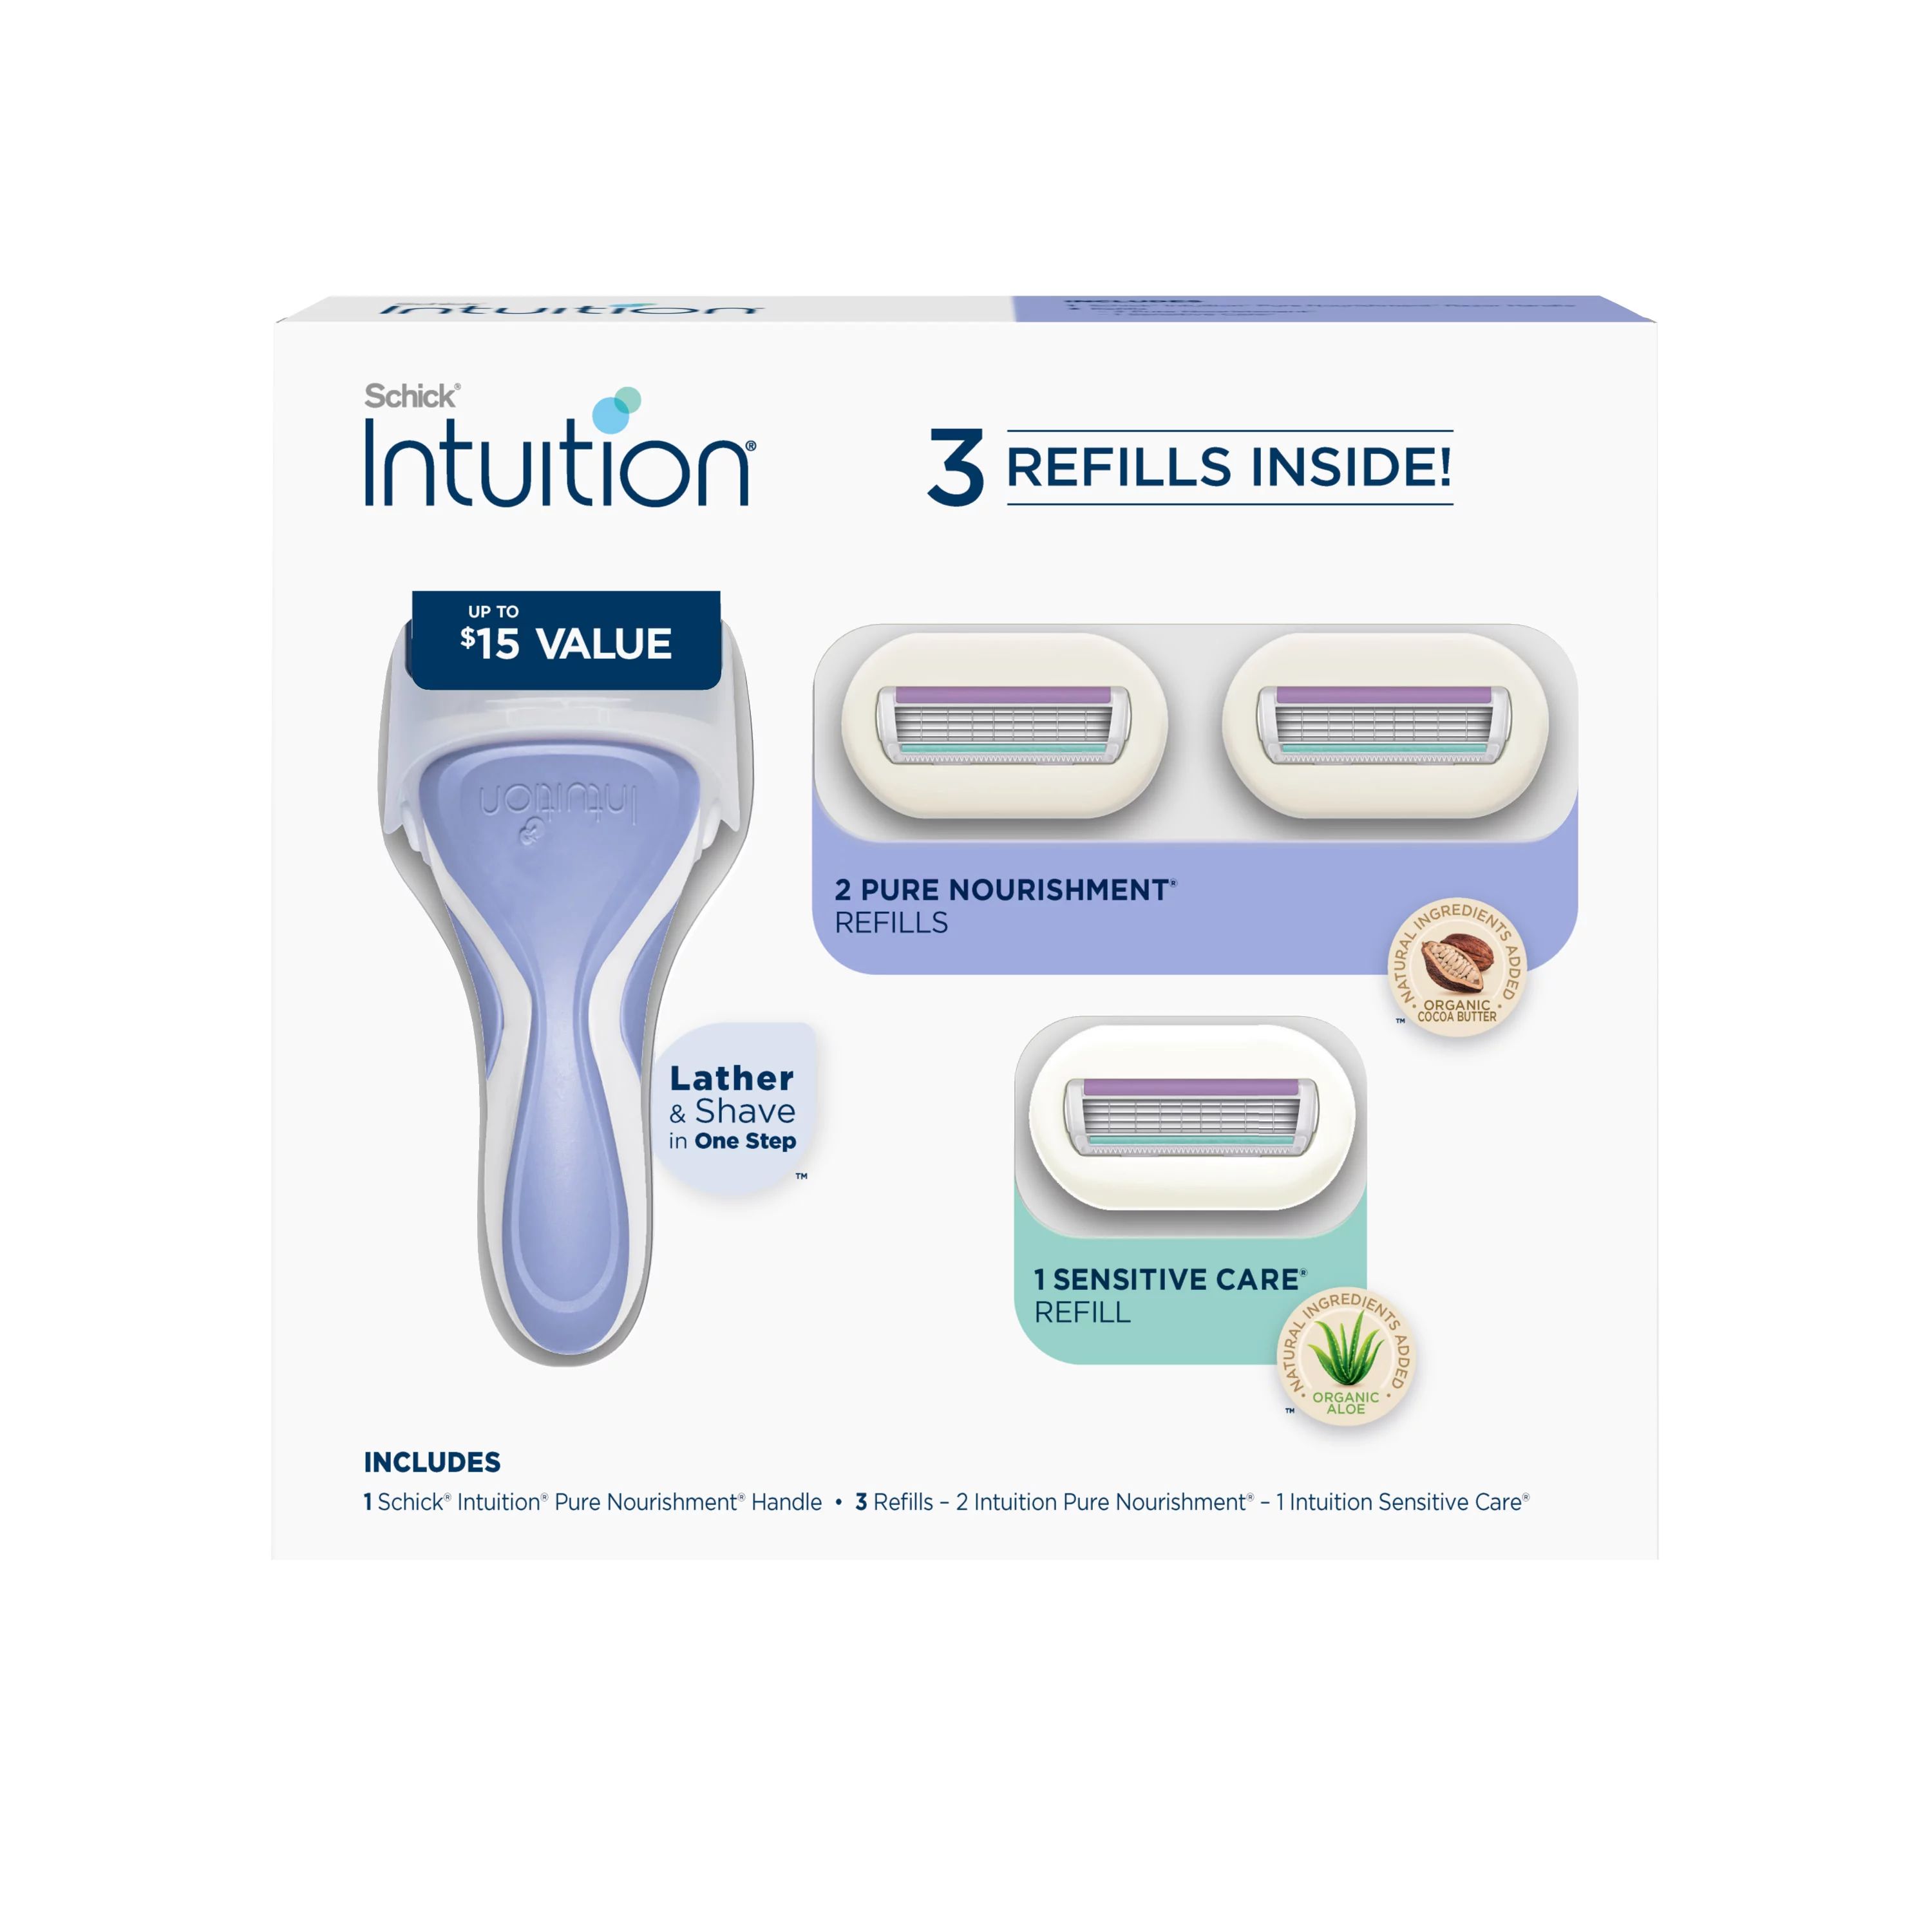 Schick Intuition Women's Gift Set, with 1 Schick Intuition Pure Nourishment Handle, 2 Intuition P... | Walmart (US)